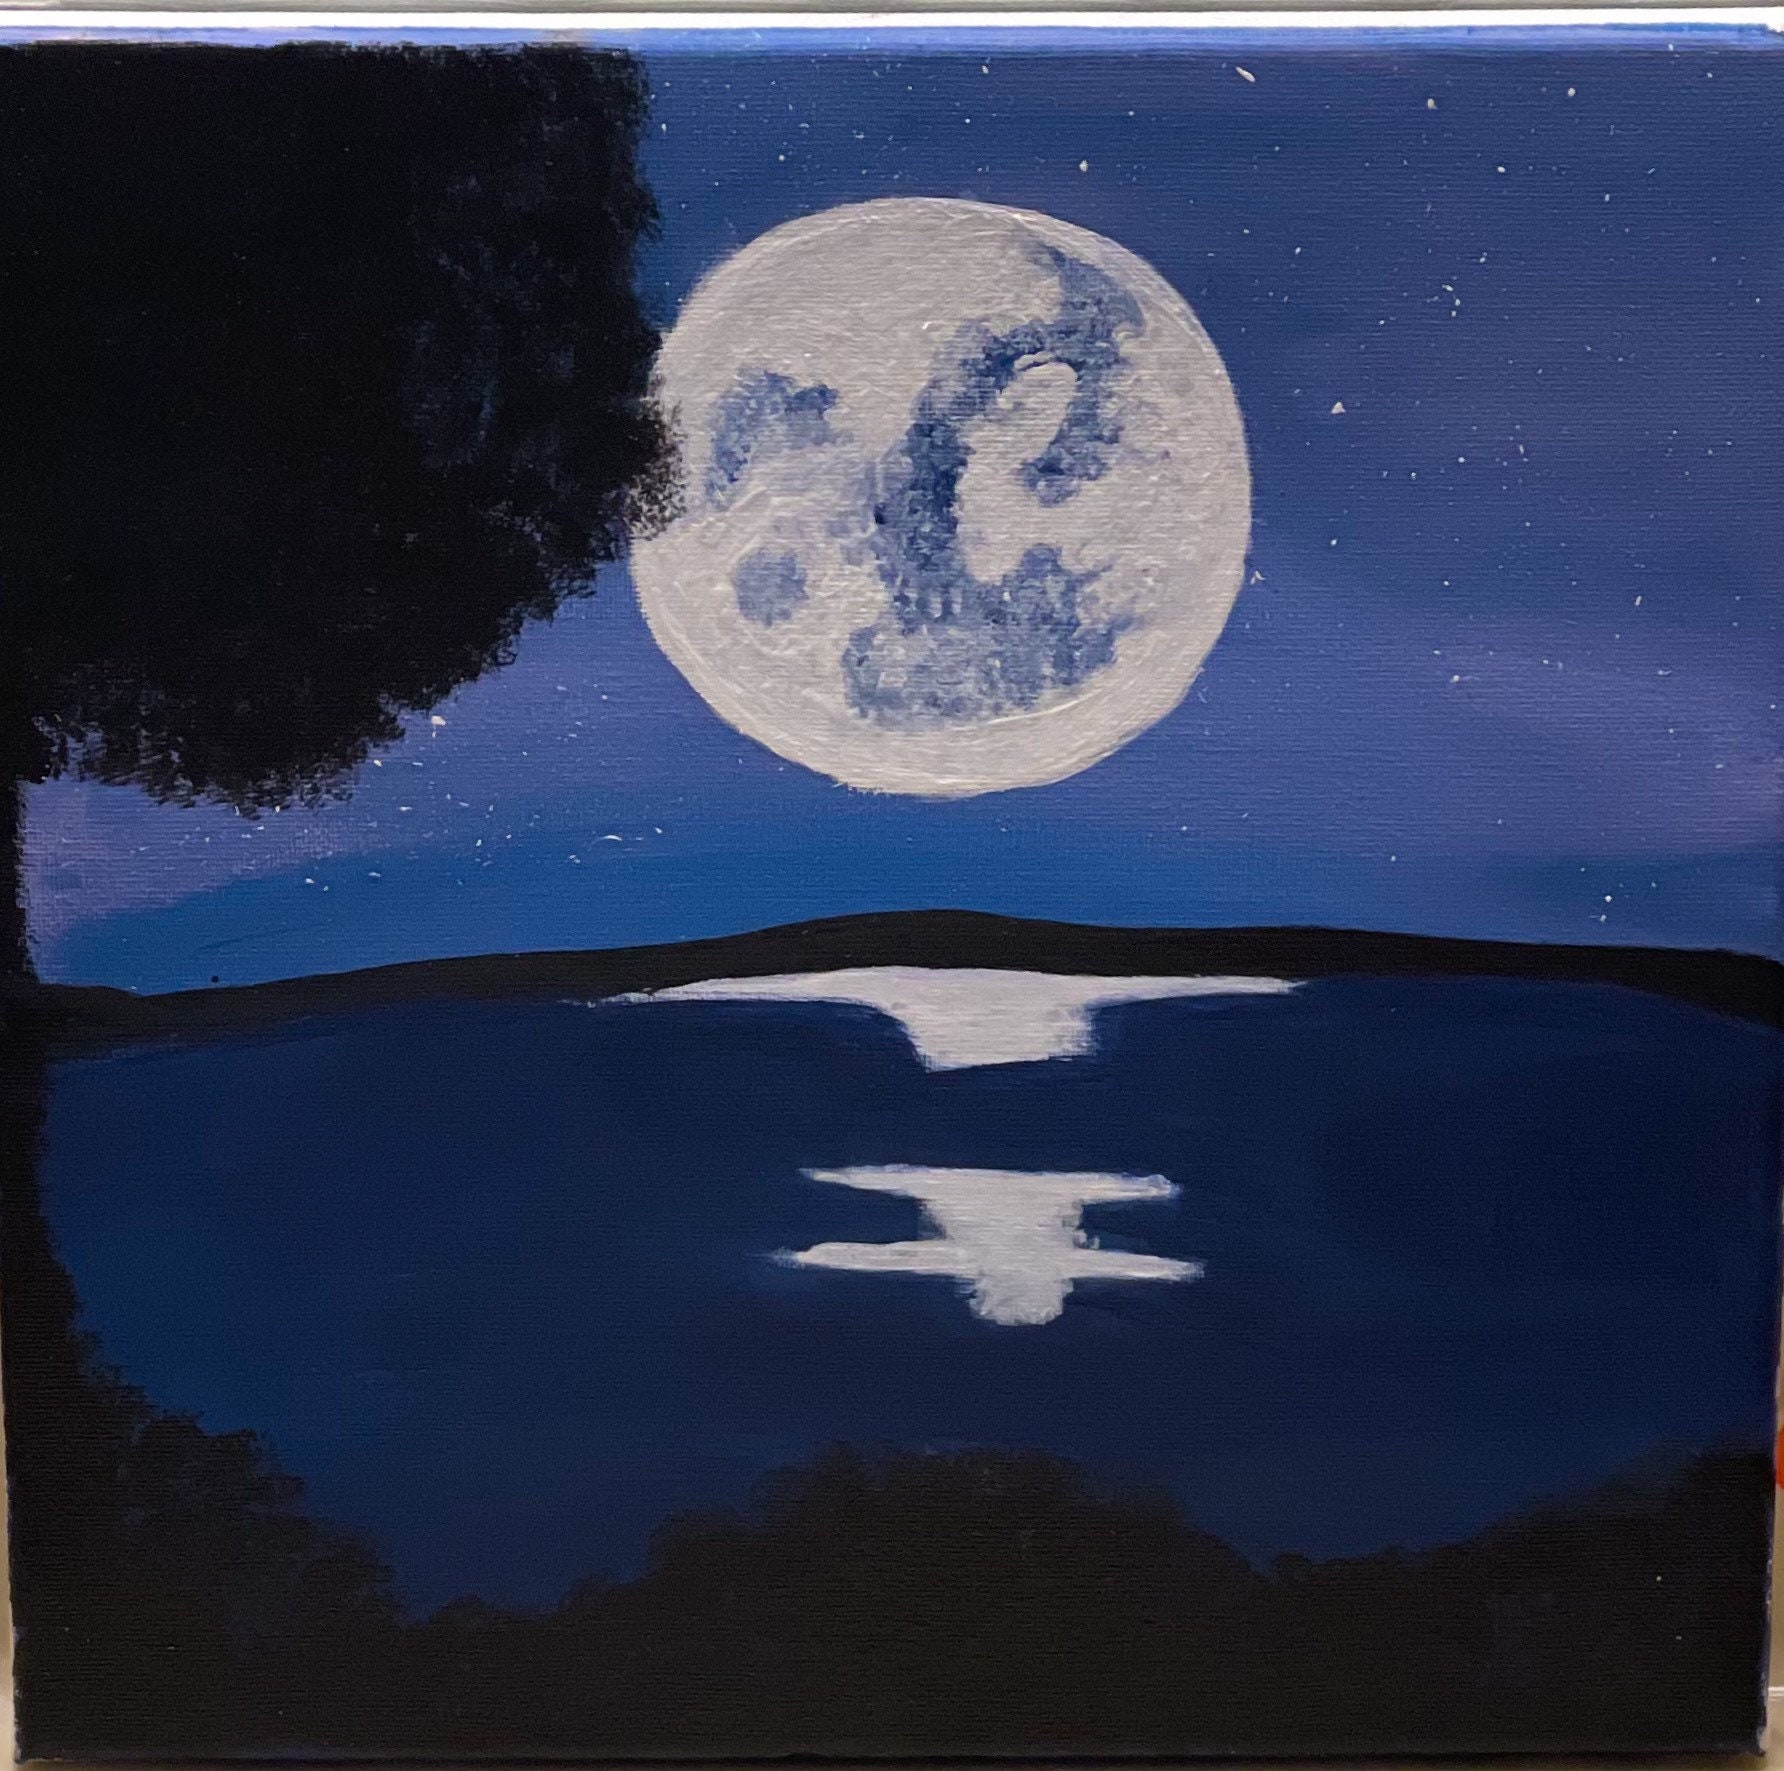 Full Moon Over Water Painting Etsy